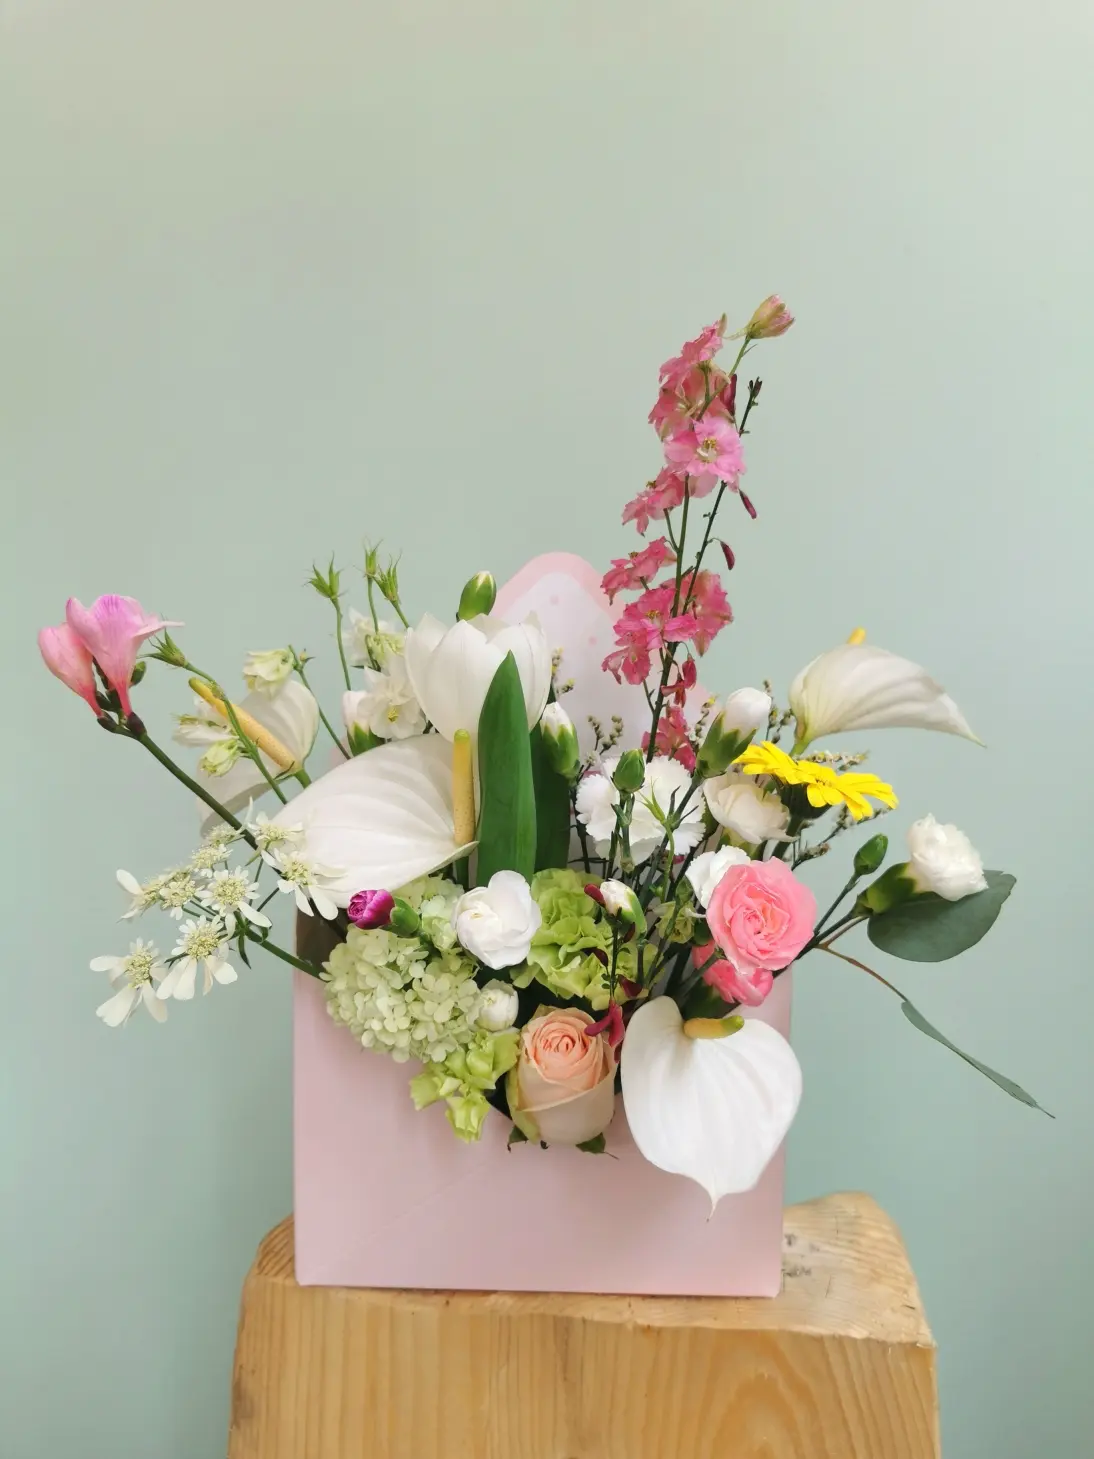 This is a light and fun variation on the flower box theme. You only need a few species to achieve a wonderful effect!